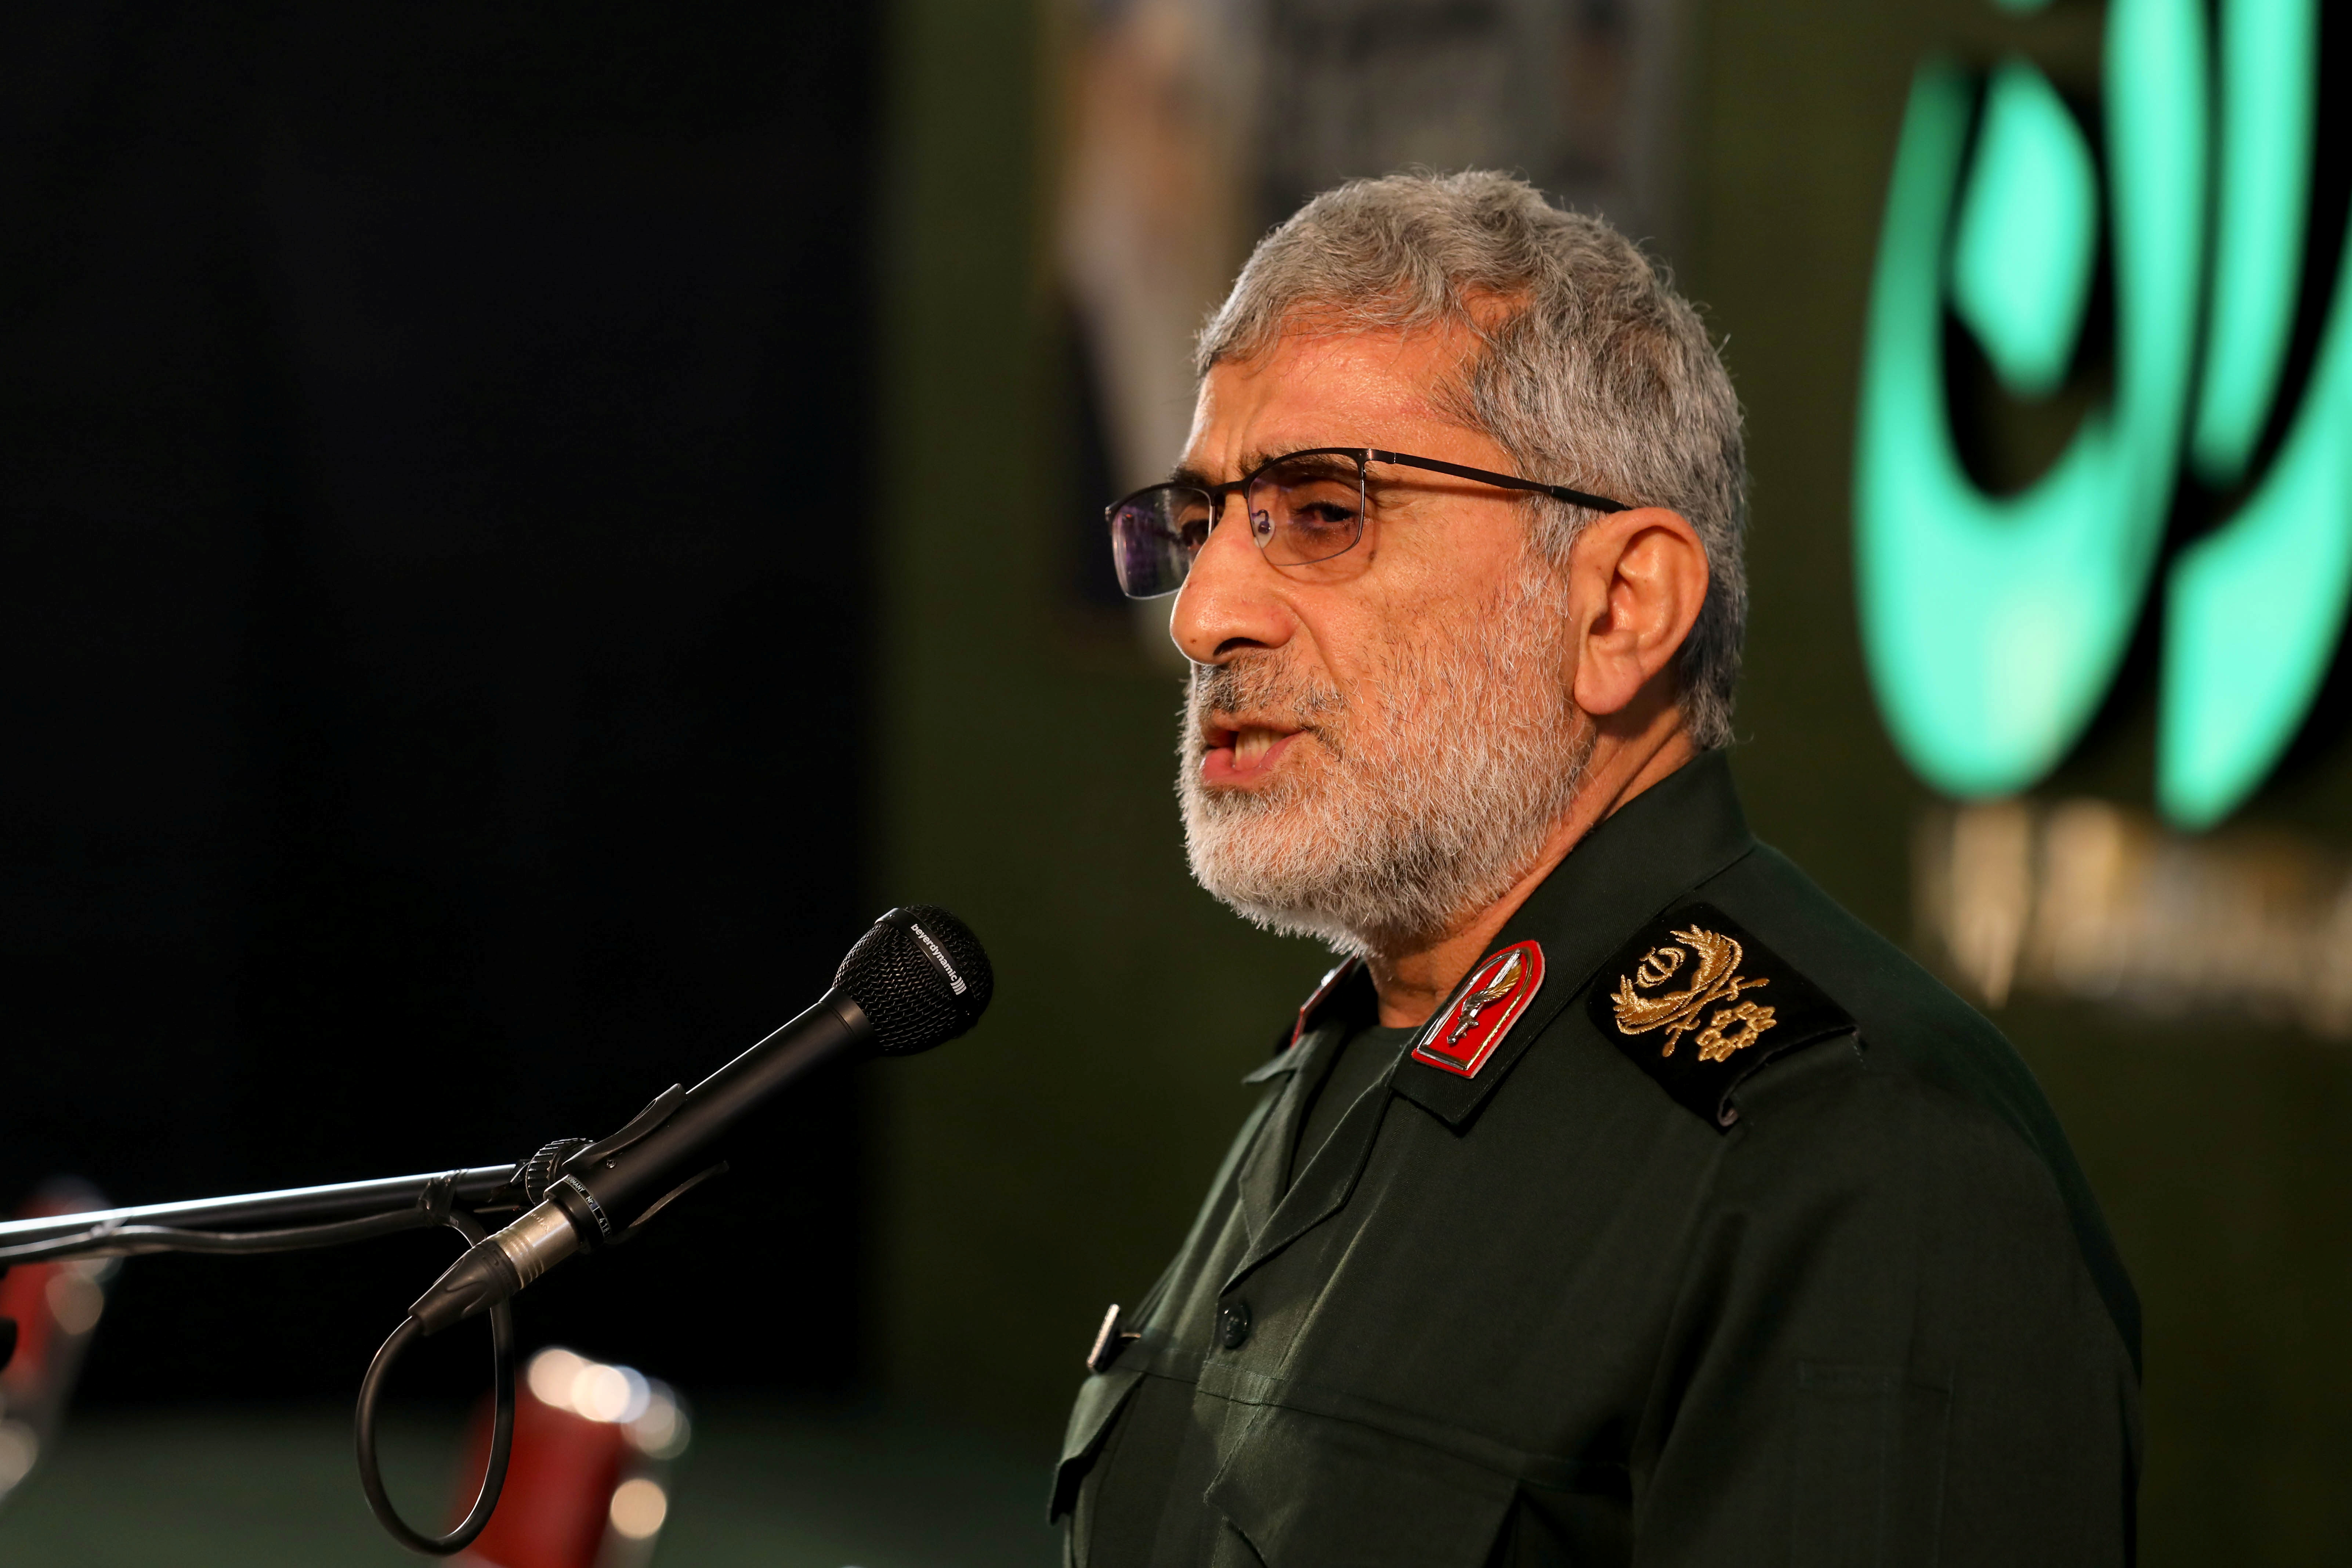 Brigadier General Esmail Ghaani Head of Iran’s elite Quds force, gives a speech during a ceremony to mark the one year anniversary of the killing of senior Iranian military commander General Qassem Soleimani in a U.S. attack, in Tehran, Iran January 1, 2021. Majid Asgaripour/WANA (West Asia News Agency) via REUTERS 